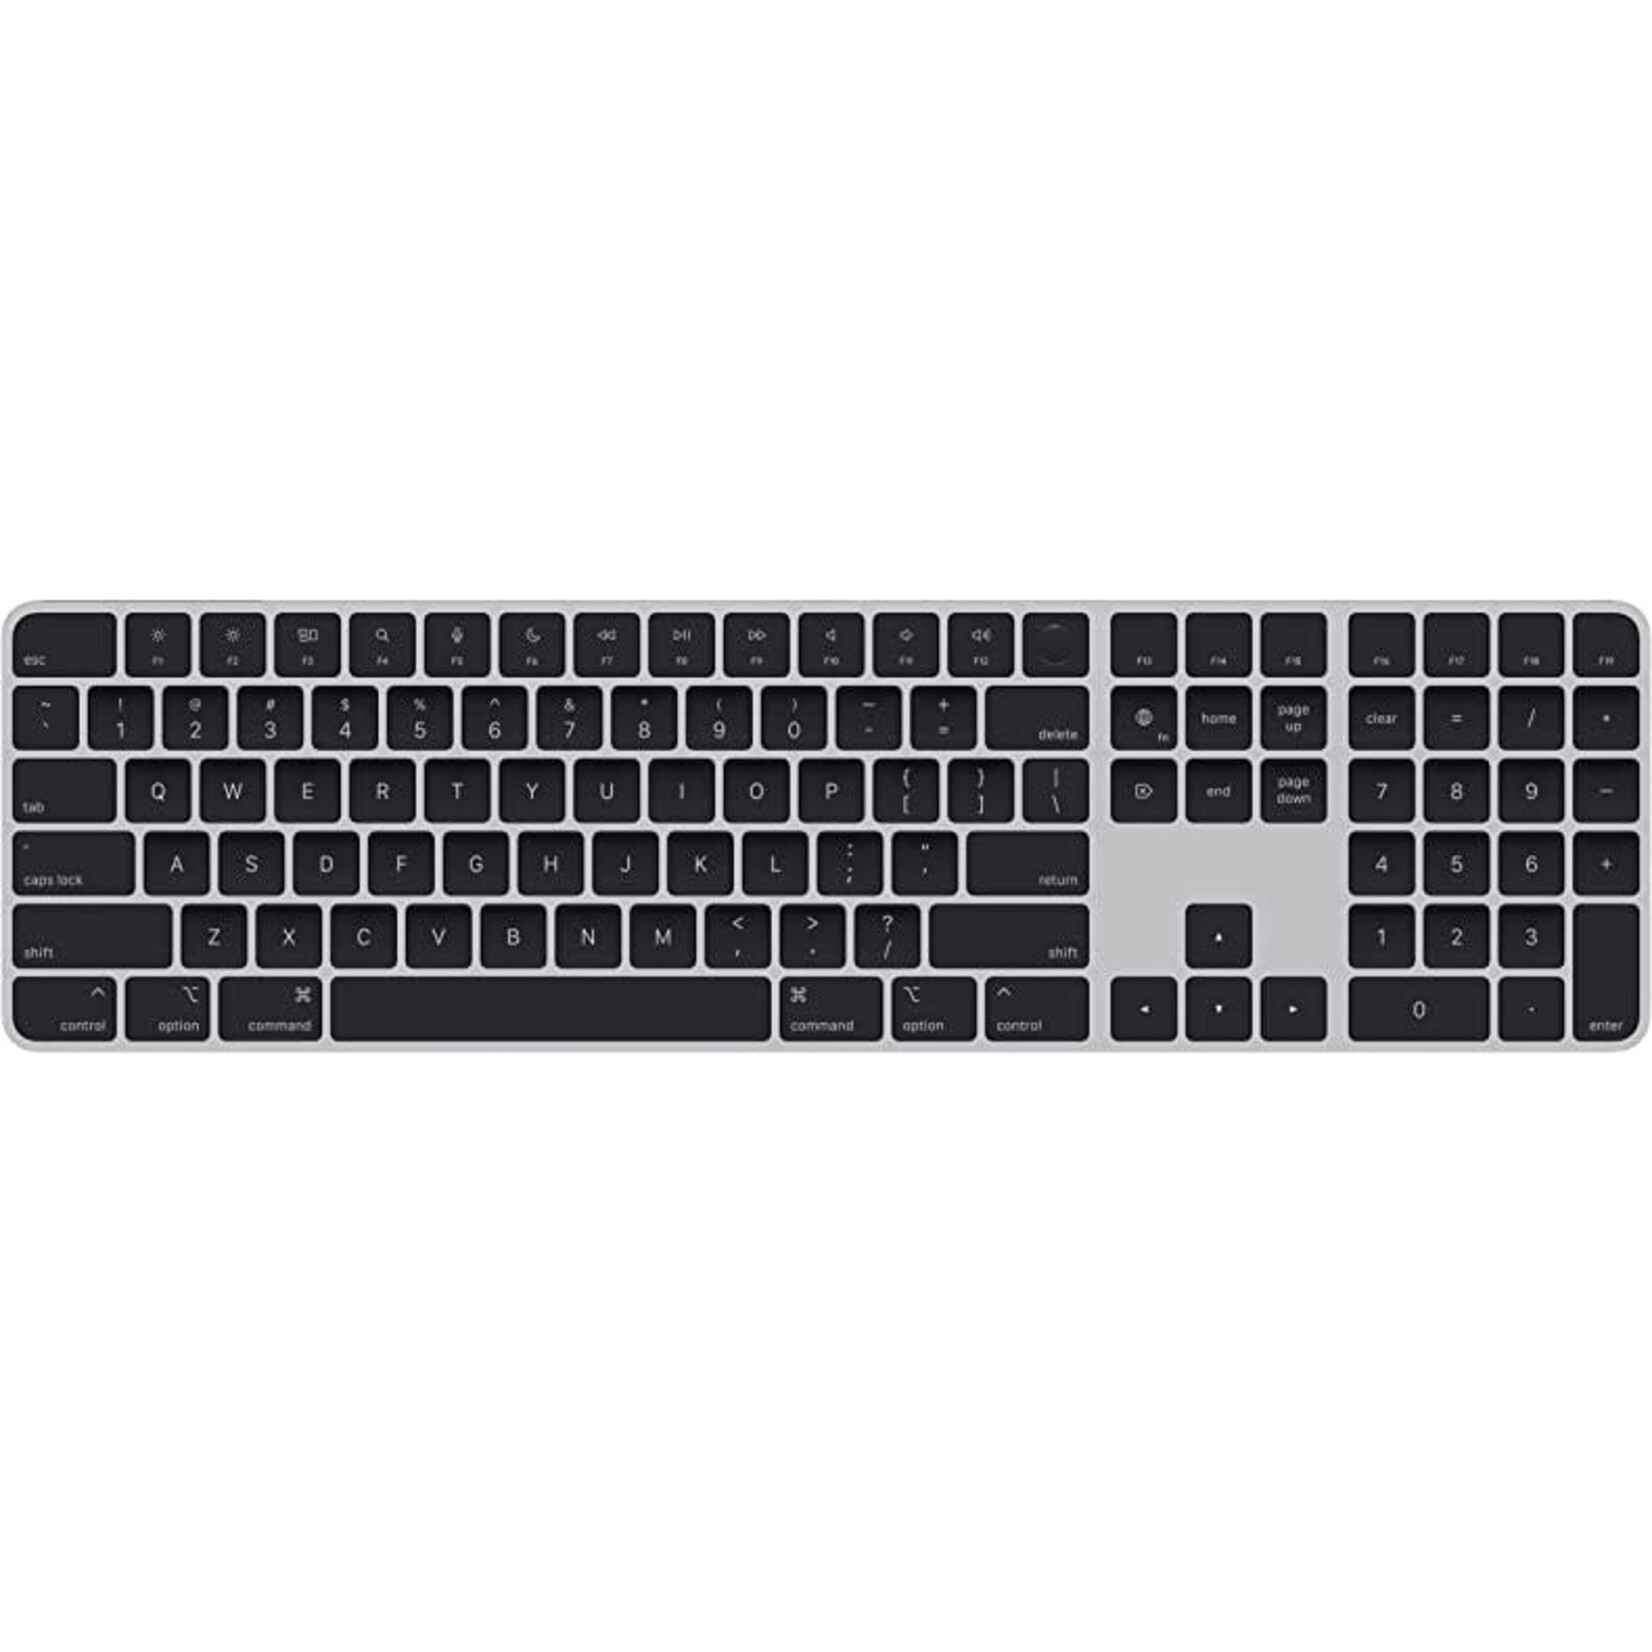 Apple Apple Magic Keyboard with Touch ID and Numeric Keypad for Mac models with Apple silicon - US English - Black Keys